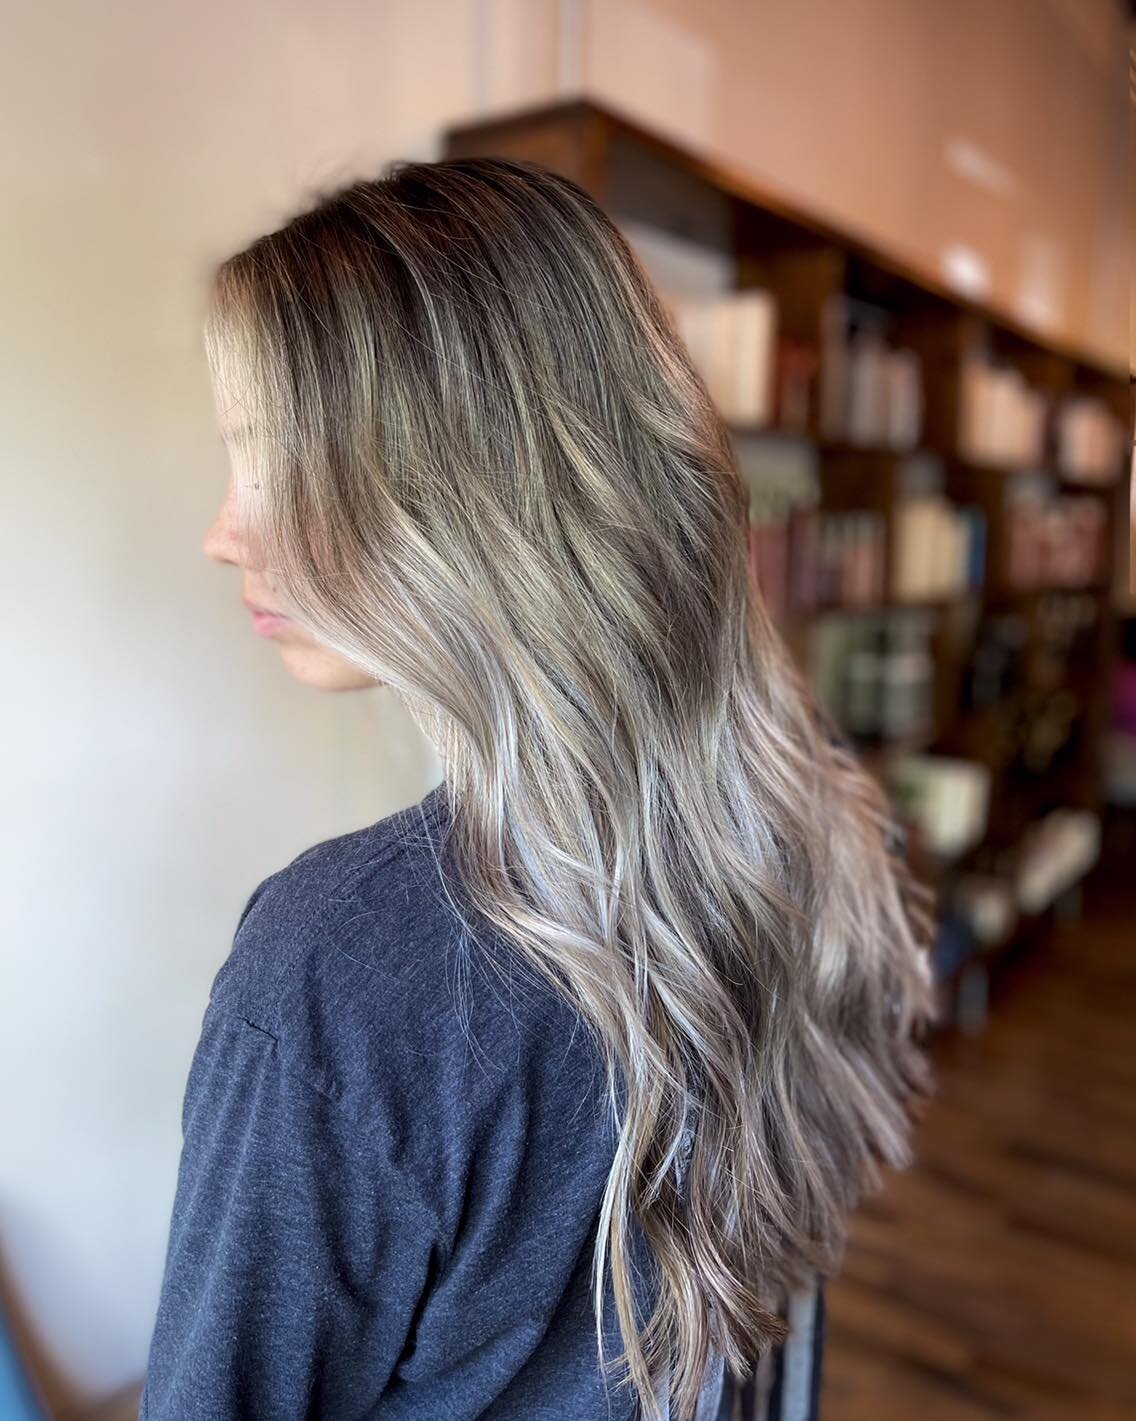 Our feelings on this stunning color (in emoji form): 💕🌞👀🔥😍👏

Like what you see? Book an appointment with us! Our New Guest Form on our website is the first step in making your hair dreams come true 🫶

#colgahairstylists #uptowncolumbusga #blon